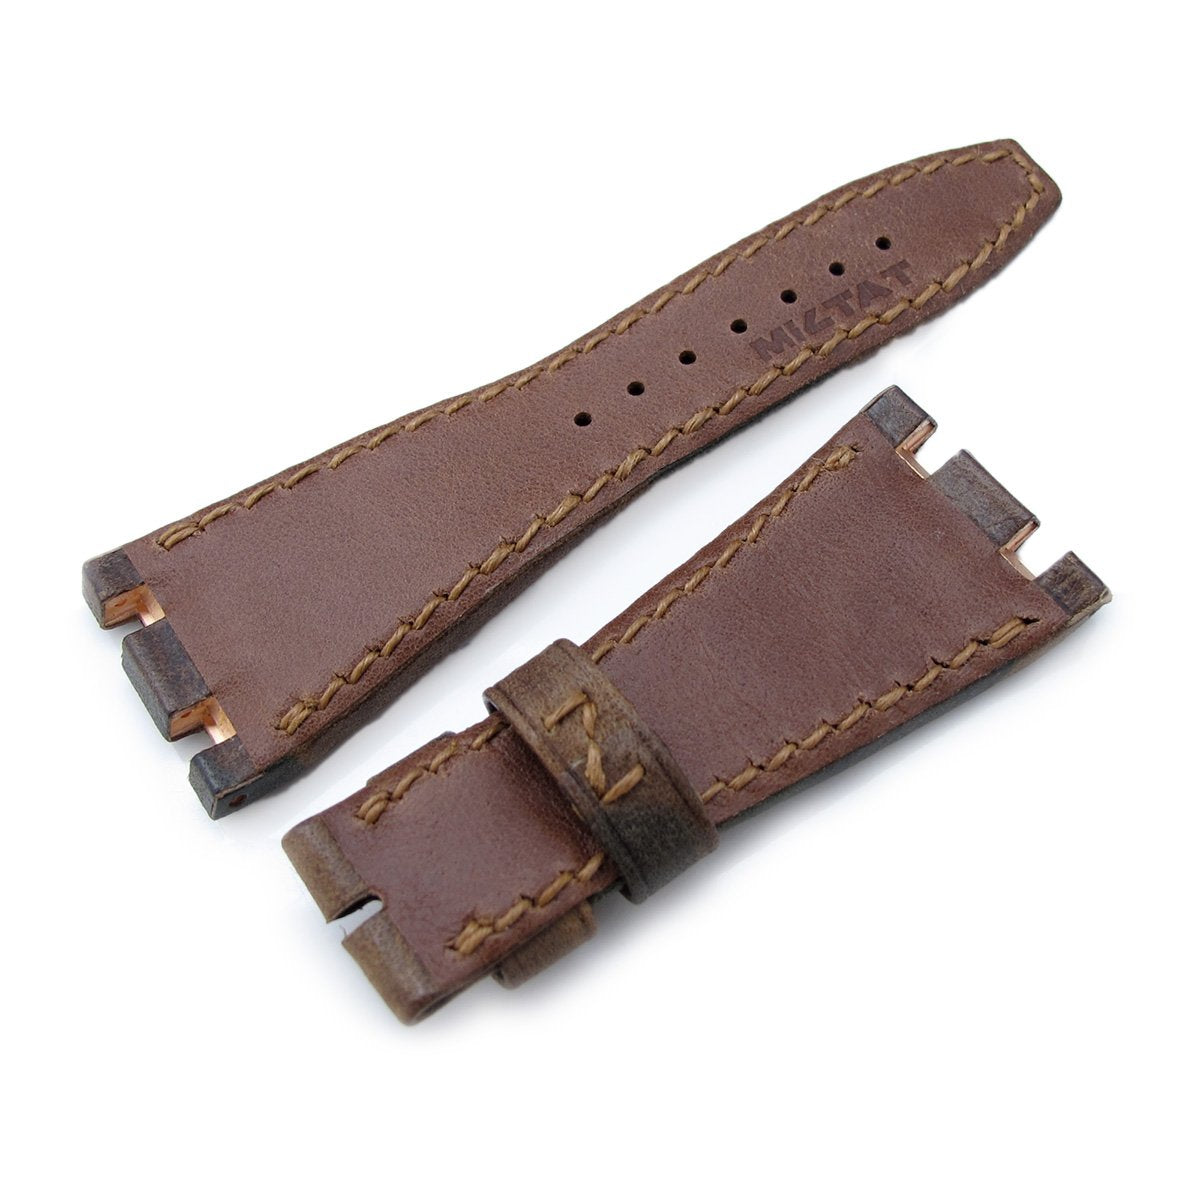 Camo Pattern Leather of Art Watch Strap Wax thread Brown Stitching custom made for Audemars Piguet Royal Oak Offshore Strapcode Watch Bands